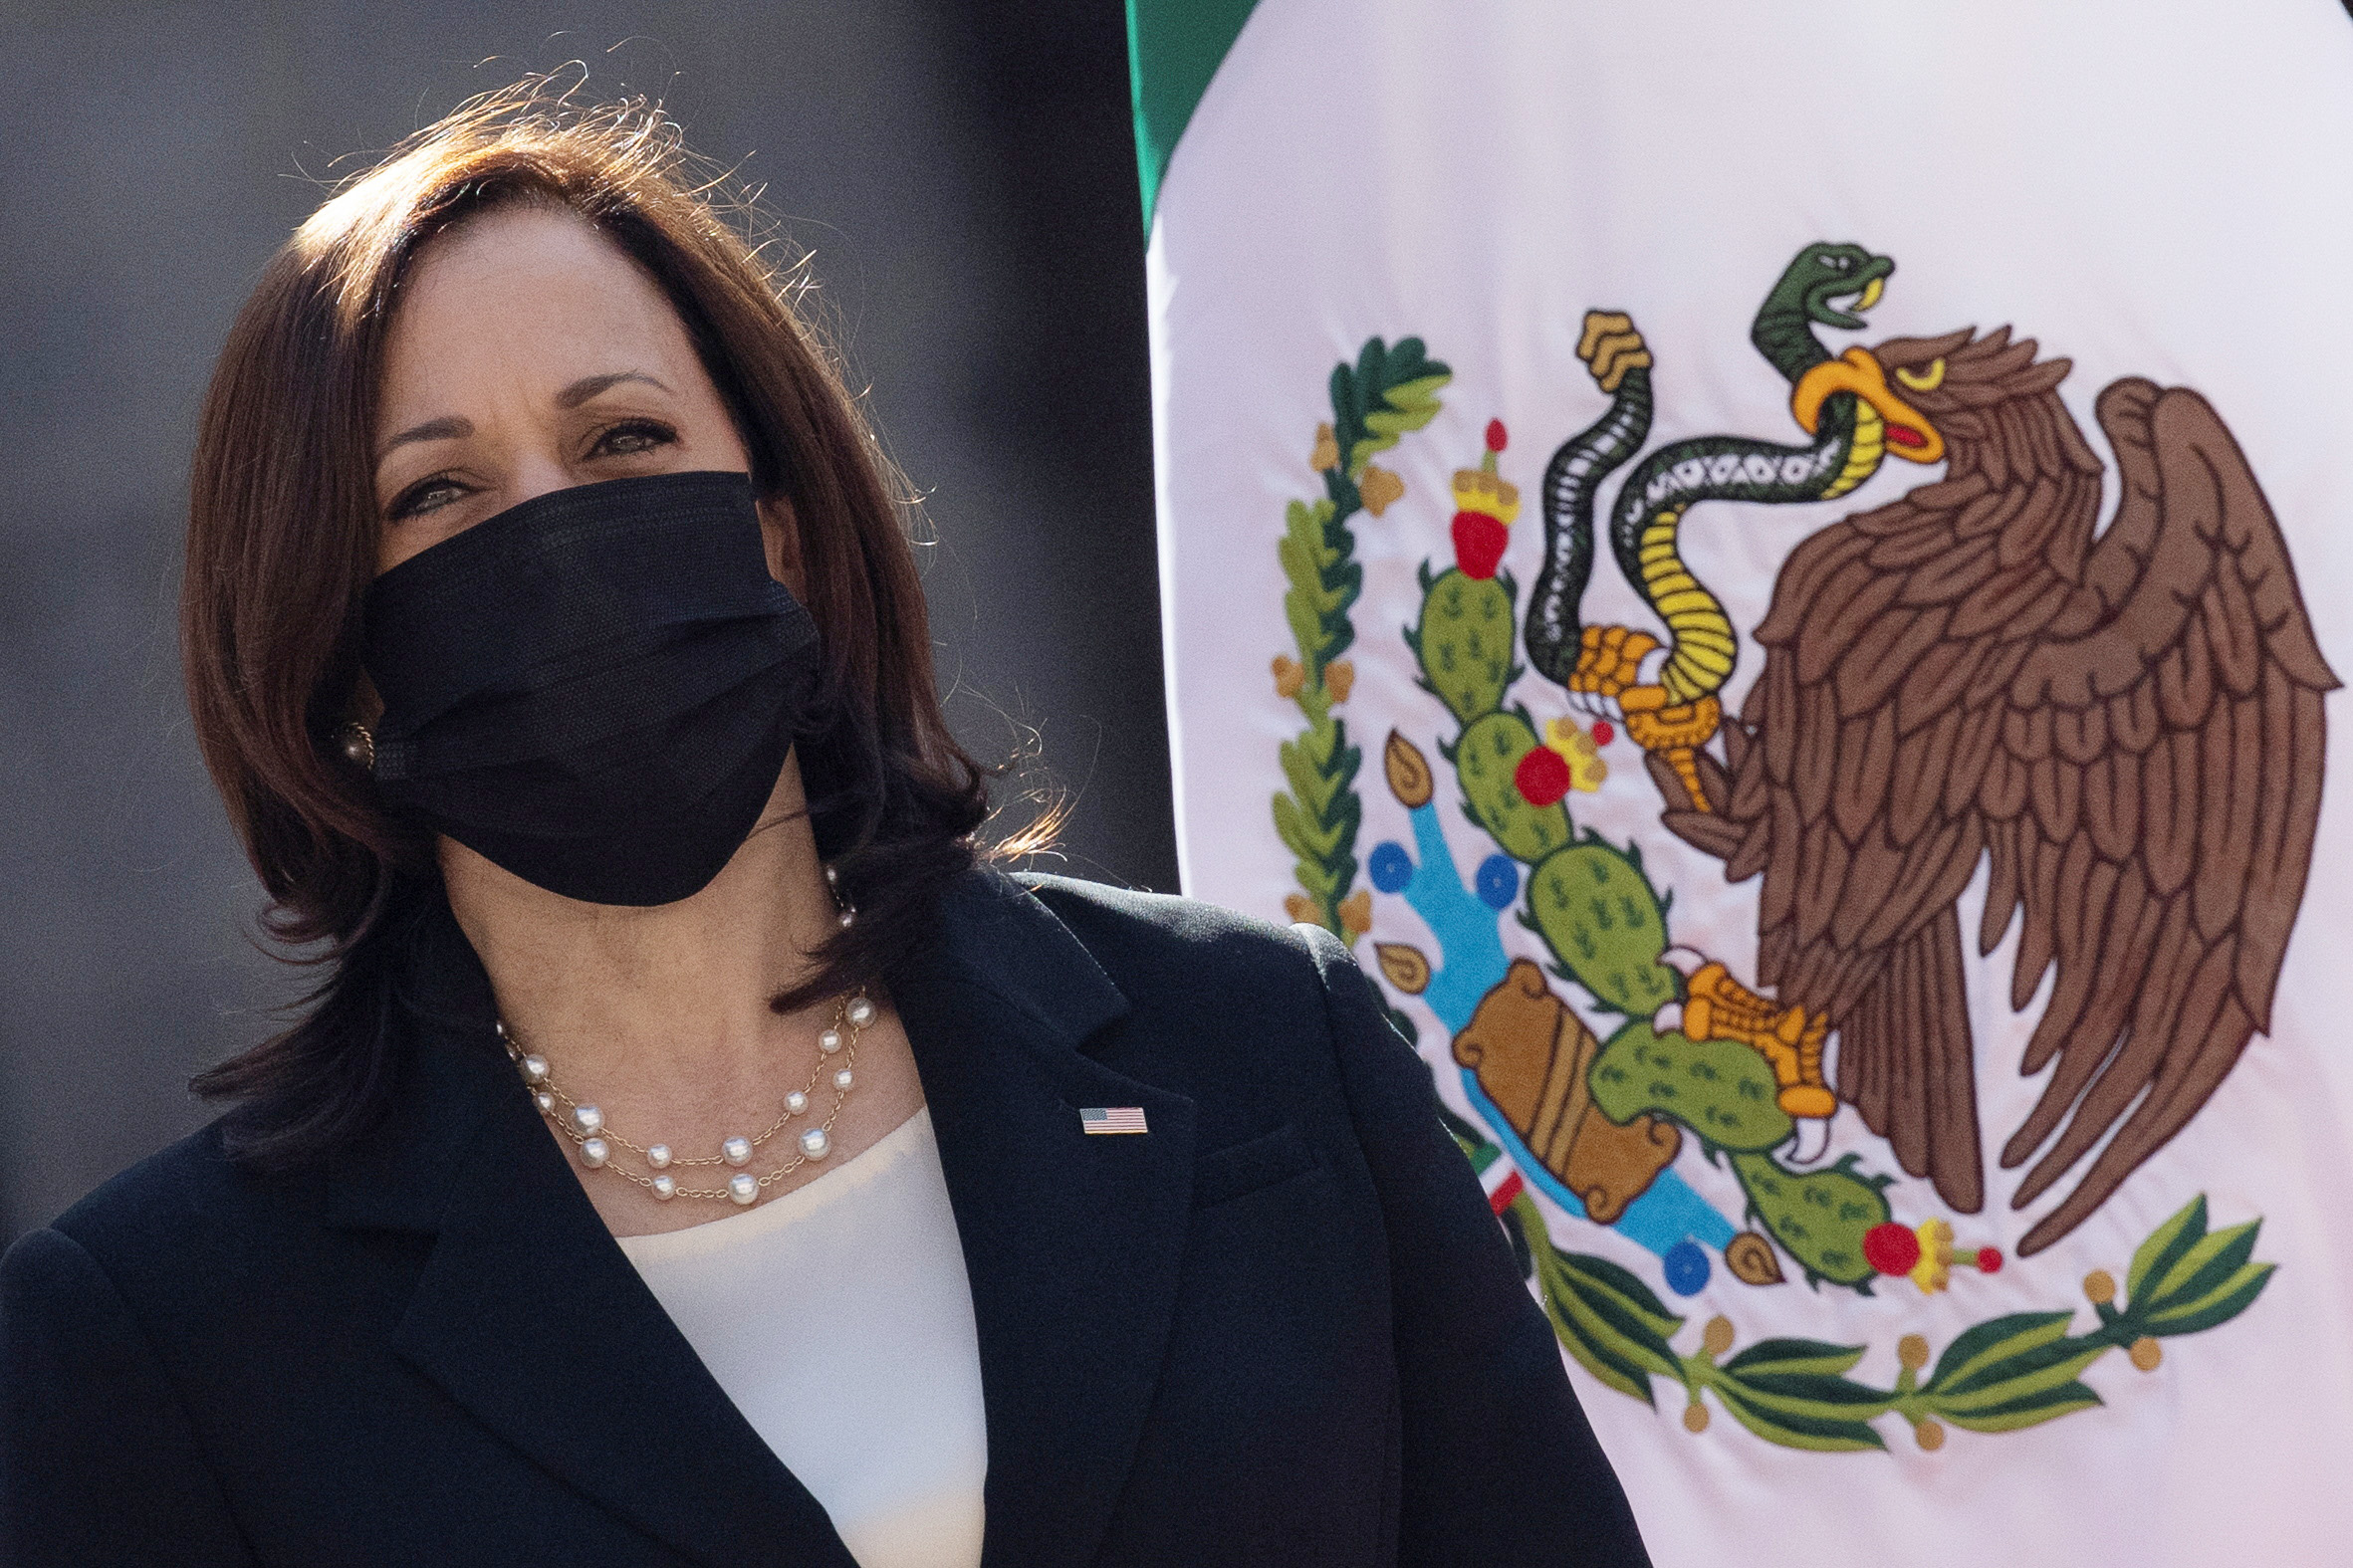 Vice President Kamala Harris looks on as she and Mexico's President Andres Manuel Lopez Obrador attend a signing ceremony establishing a strategic partnership to cooperate on development programs in the Northern Triangle in Mexico City, Mexico.